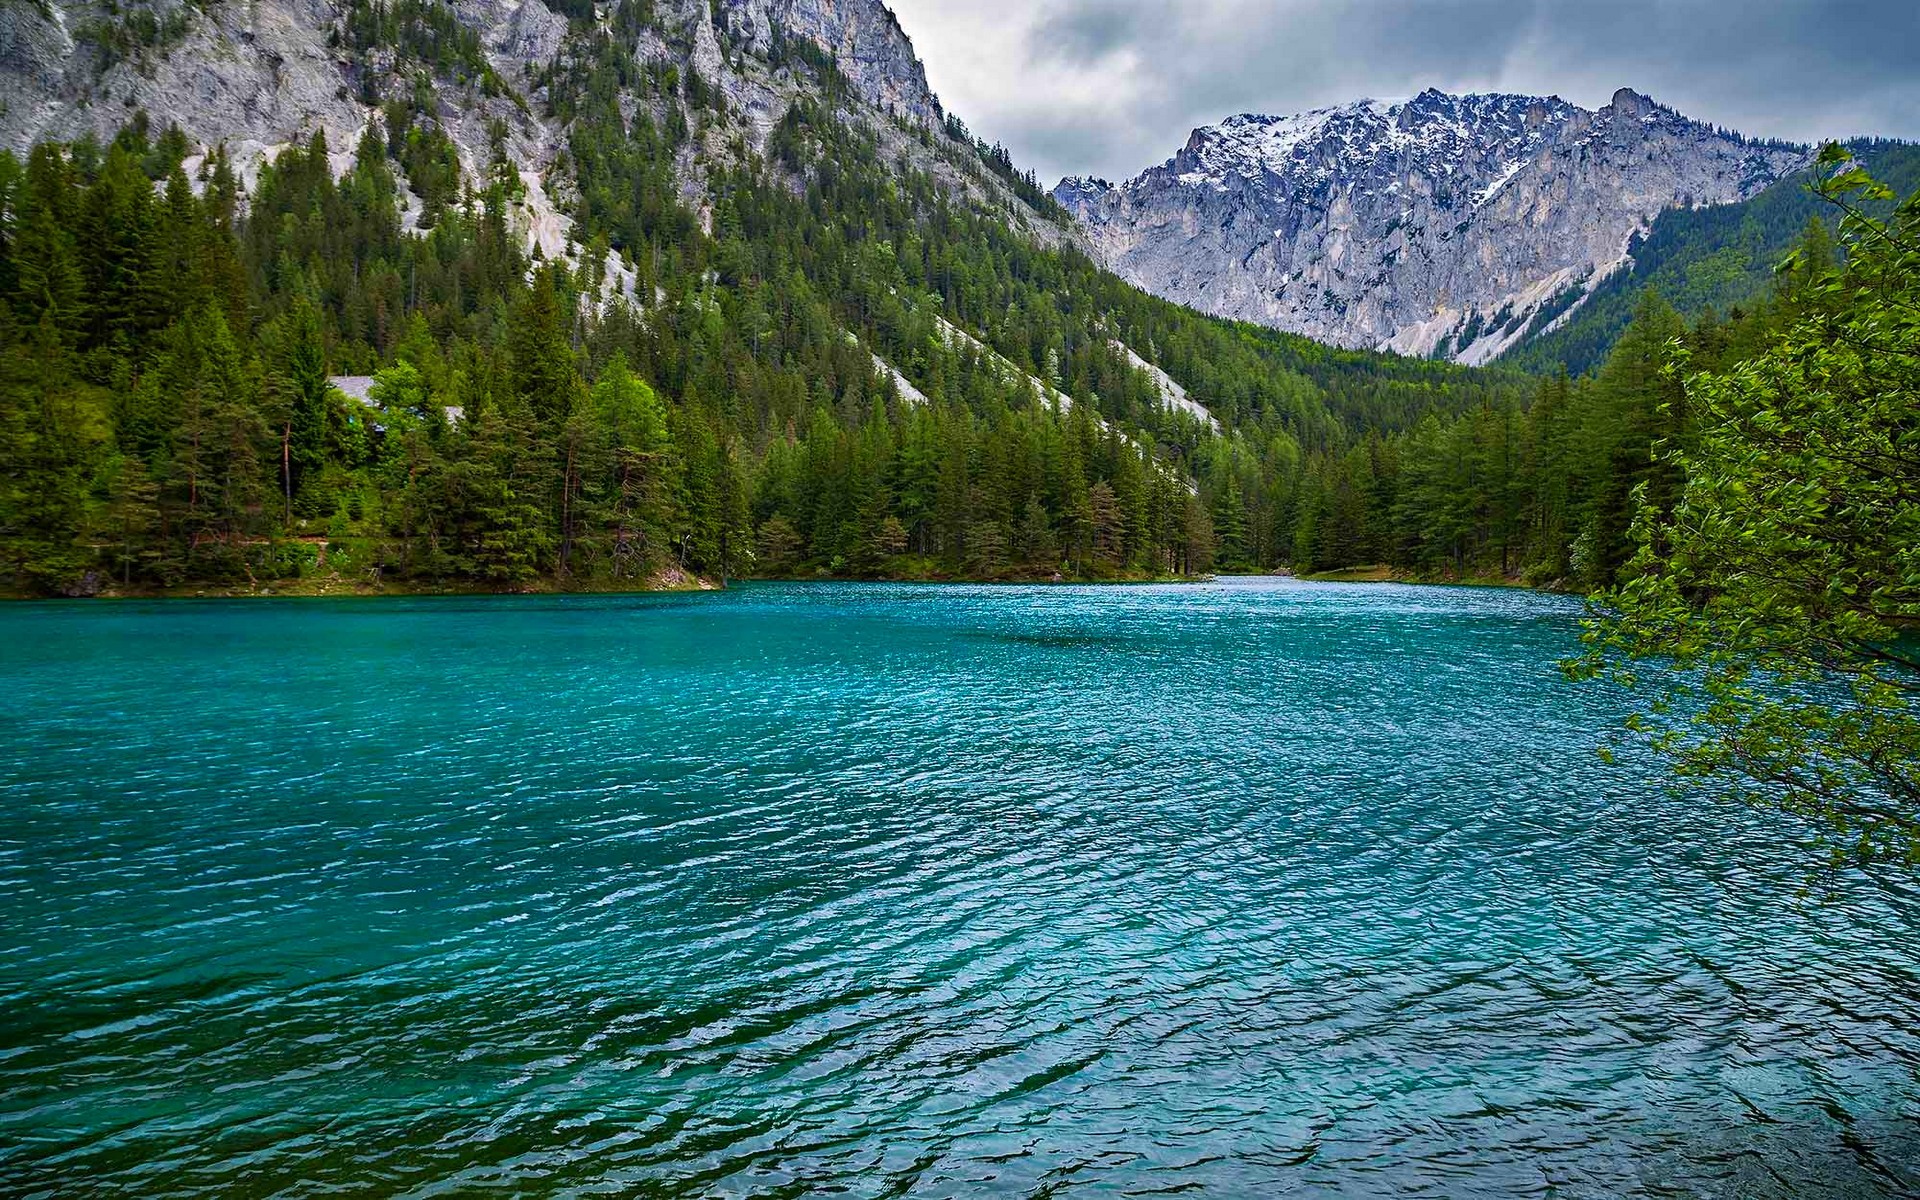 General 1920x1200 nature landscape summer lake forest mountains Alps Austria water trees turquoise green